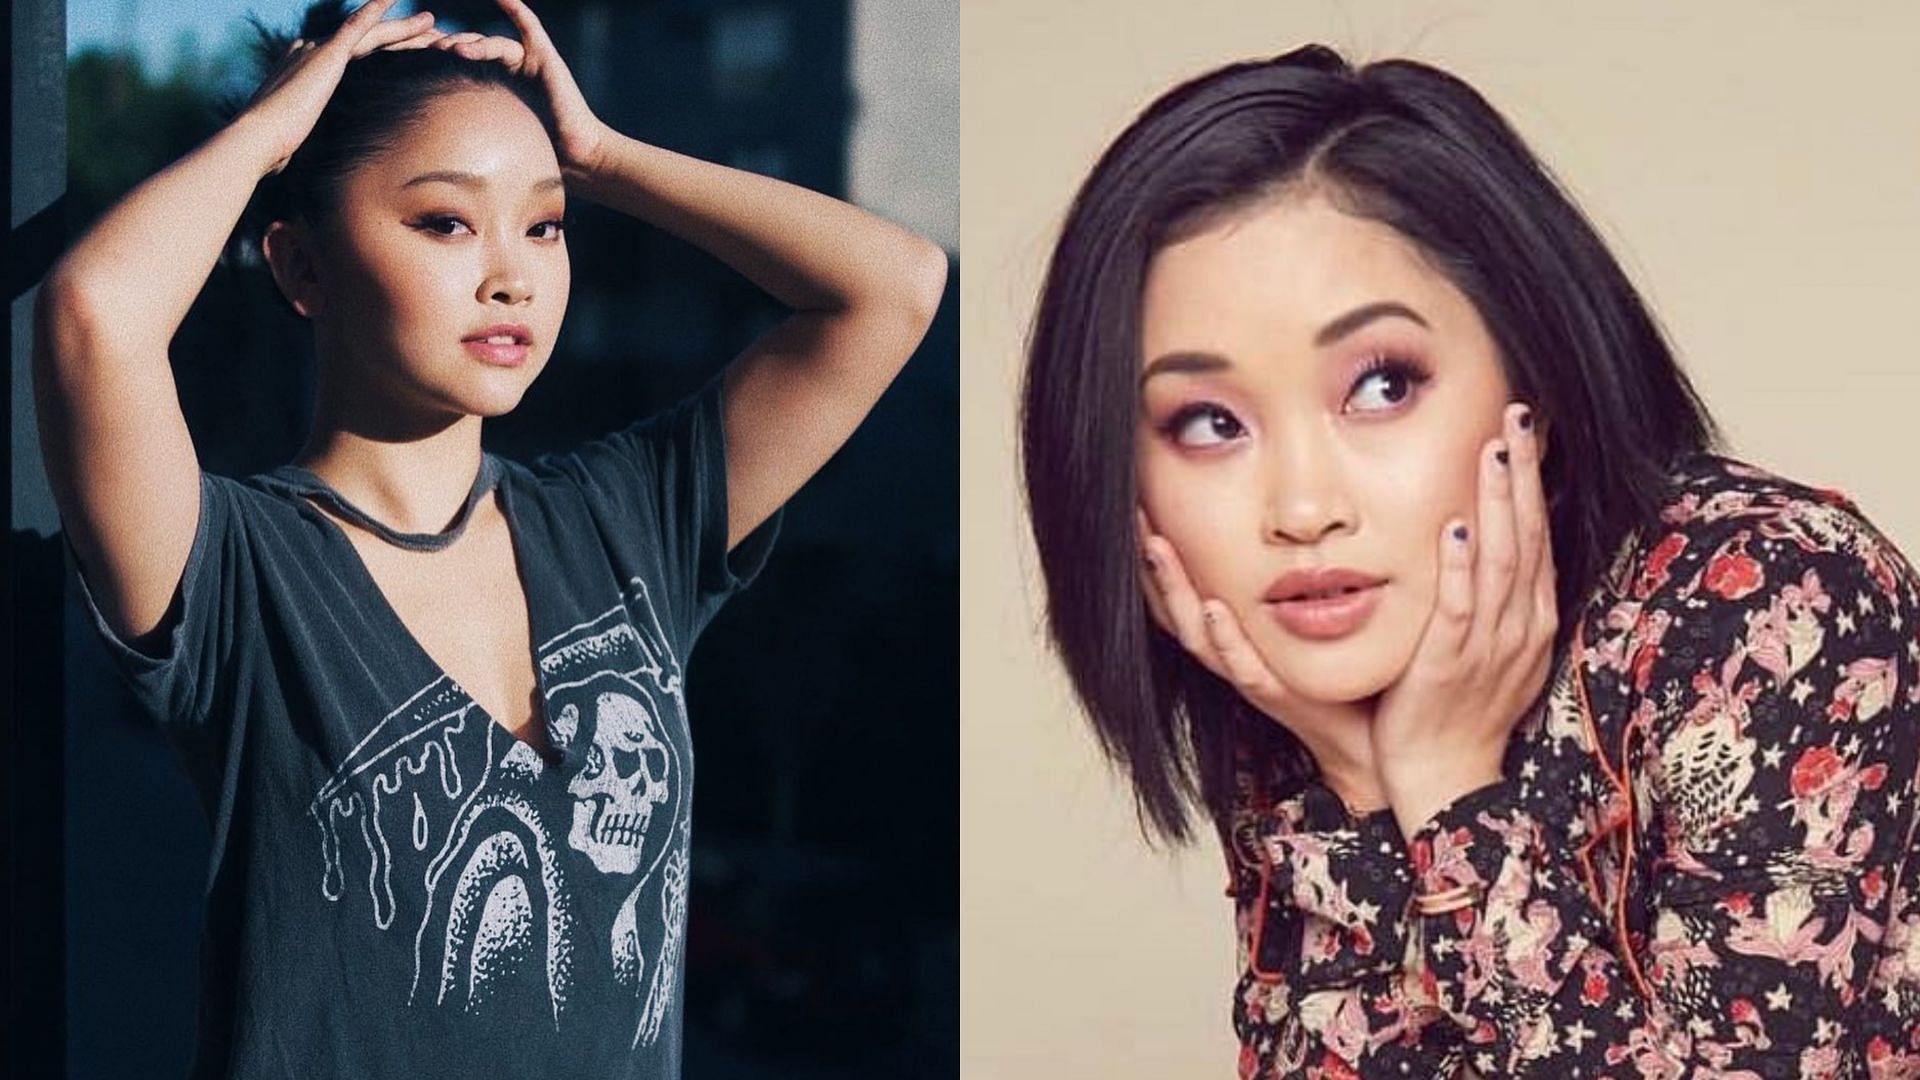 Hollywood star Lana Condor has a crush on WWE legend The Rock